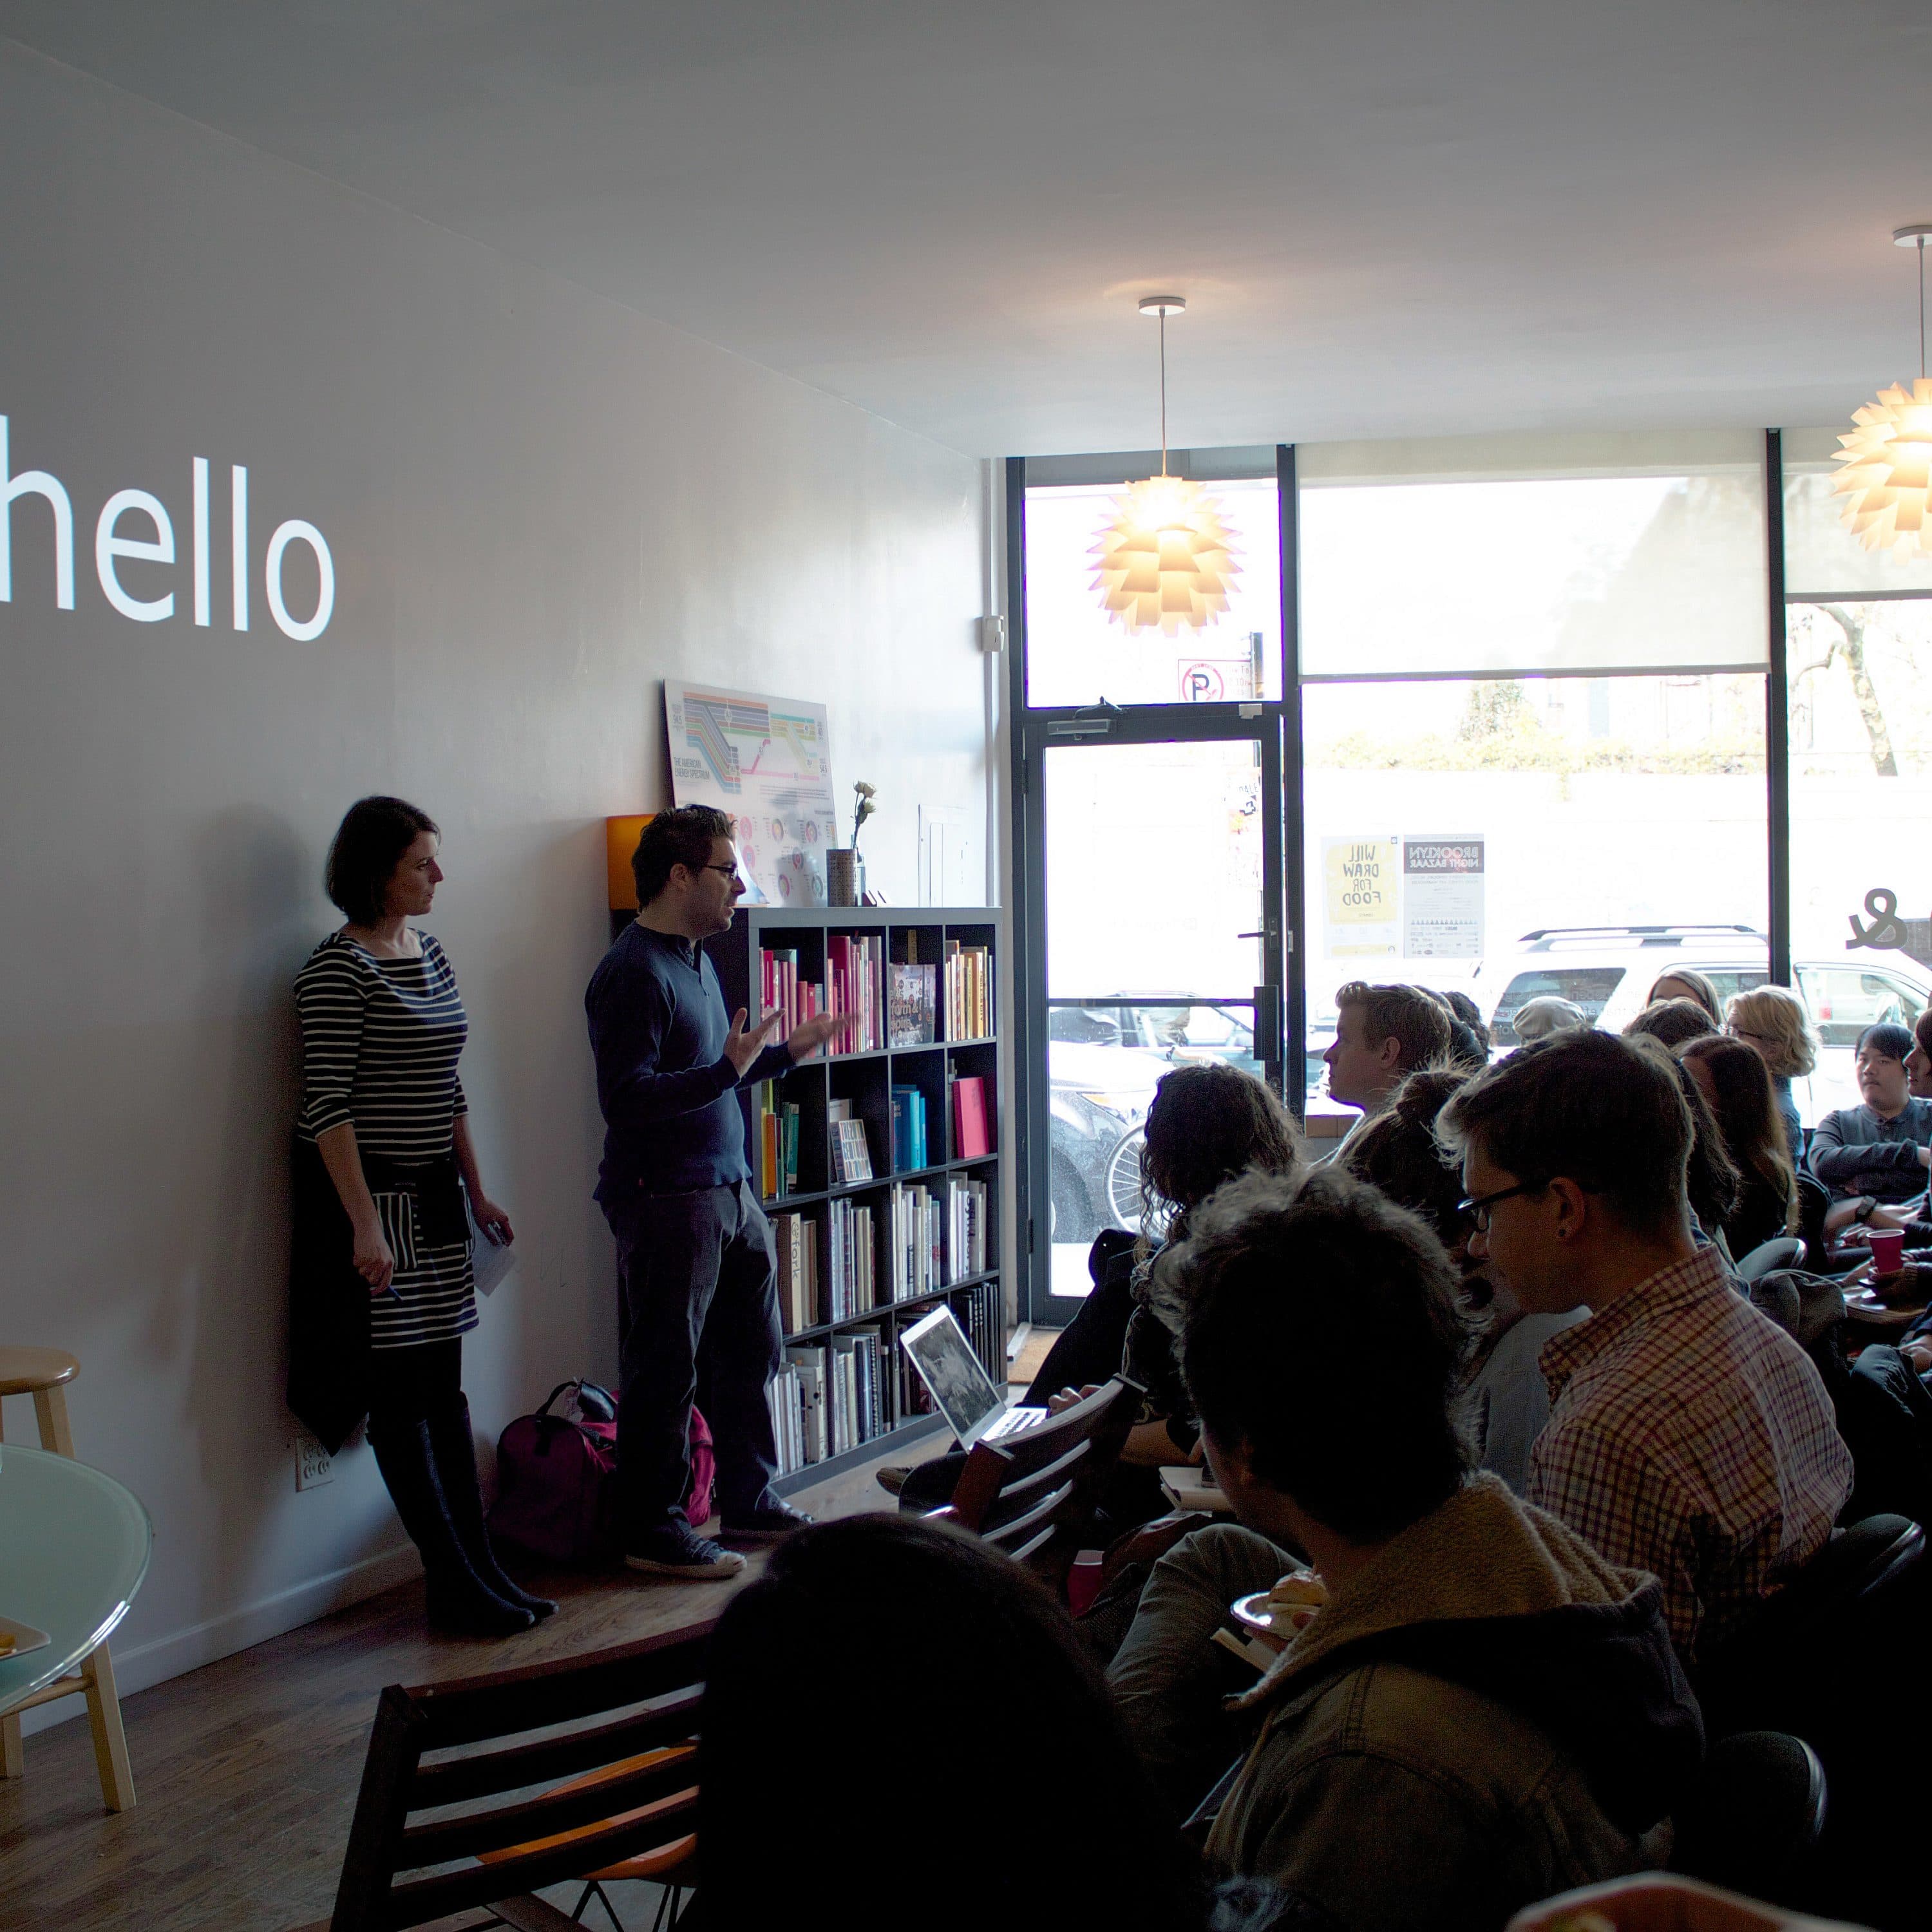 A woman and a man are standing at the front of a small room, facing an audience seated in rows. The word "hello" is projected on the wall behind them. The room has a minimalist design with hanging lamps and large windows allowing natural light.